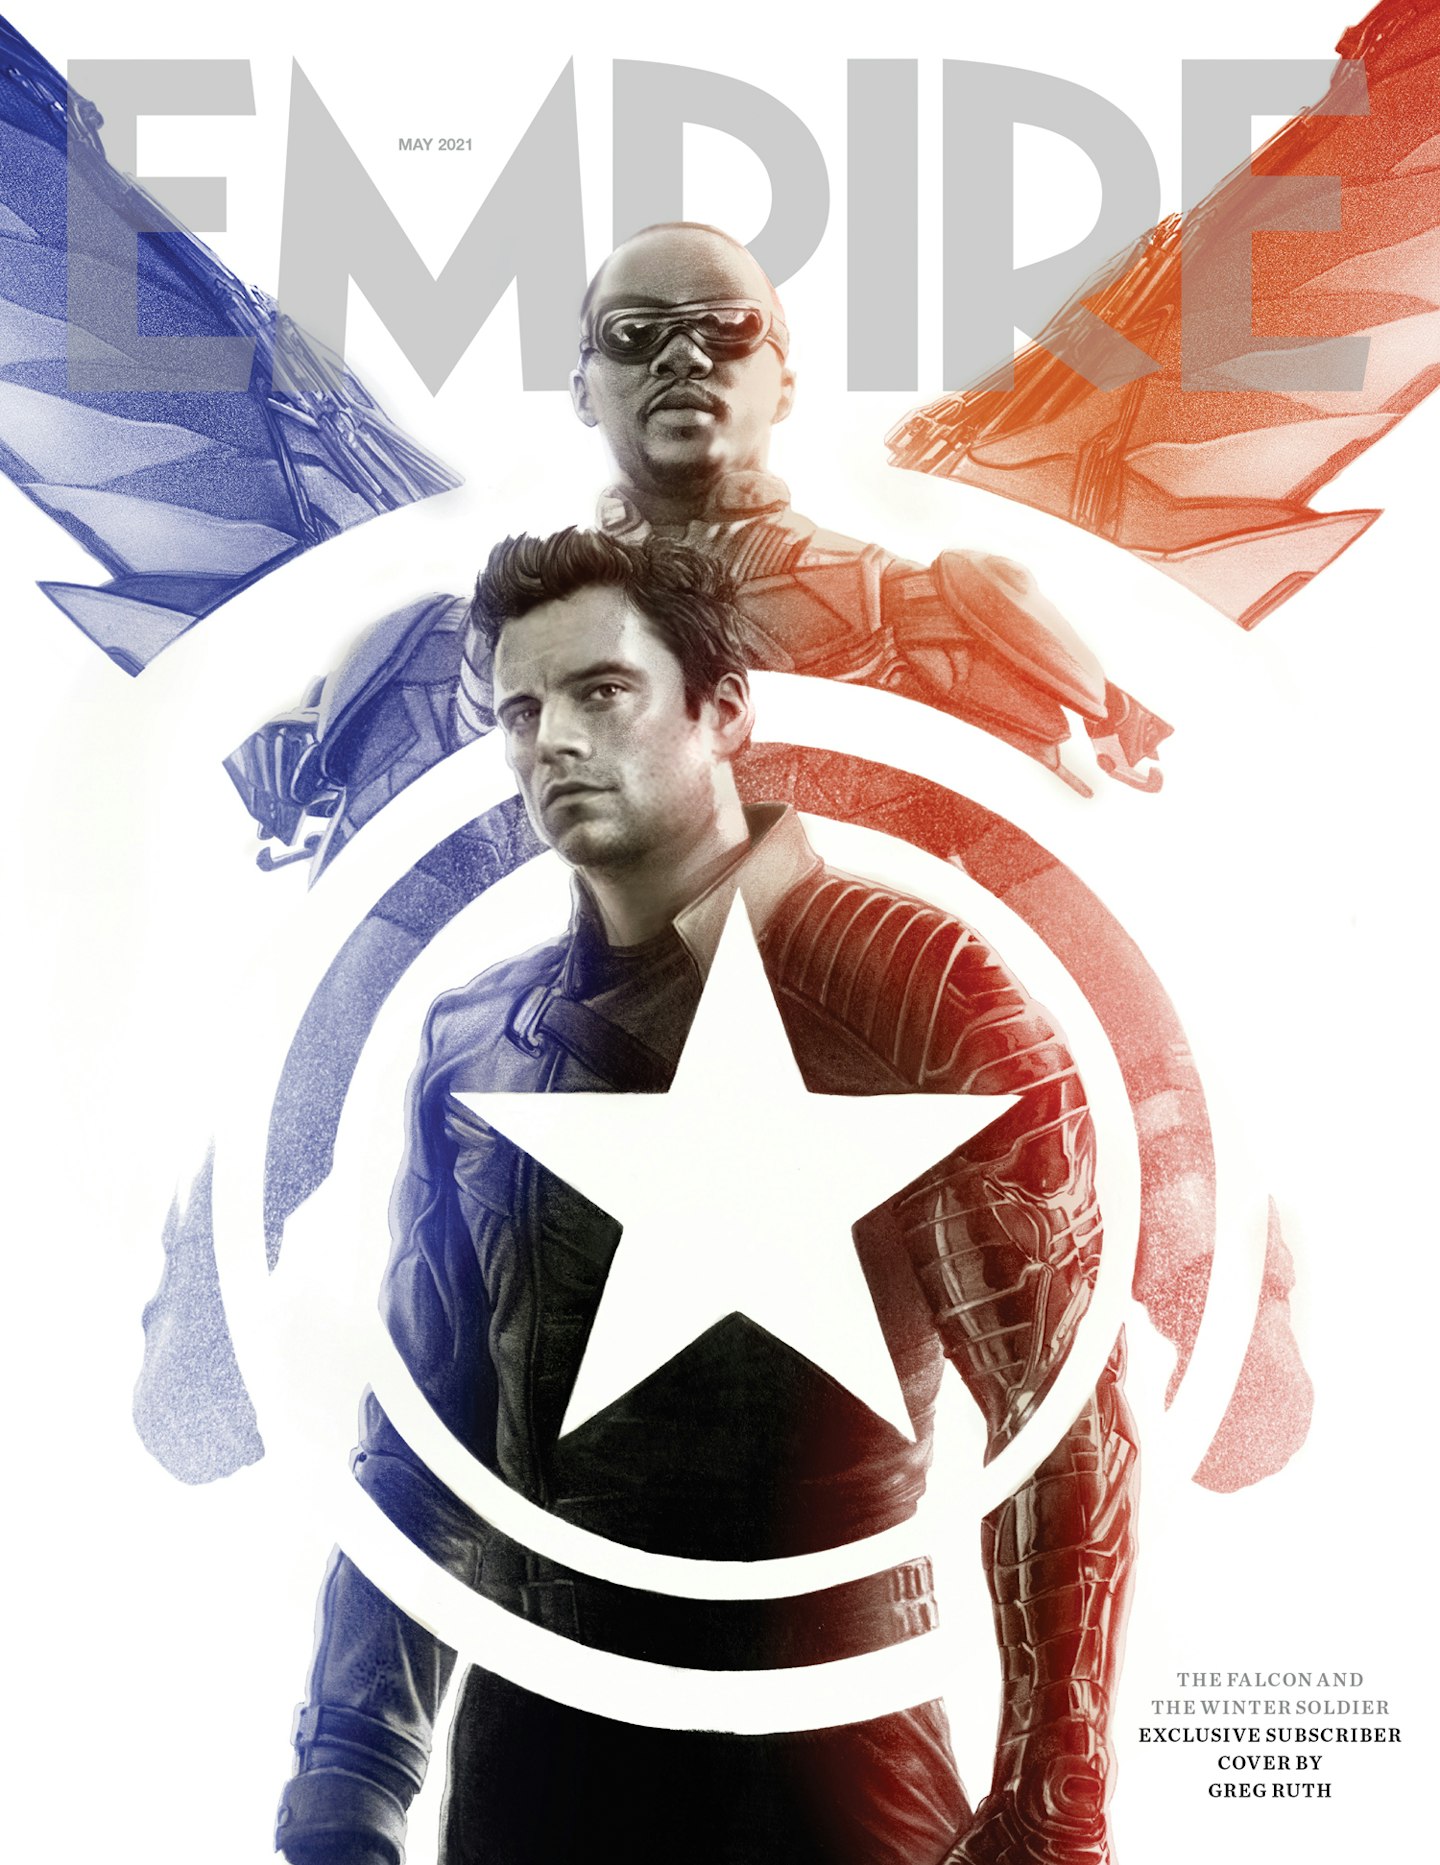 Empire May 2021 subscriber cover – The Falcon And The Winter Soldier